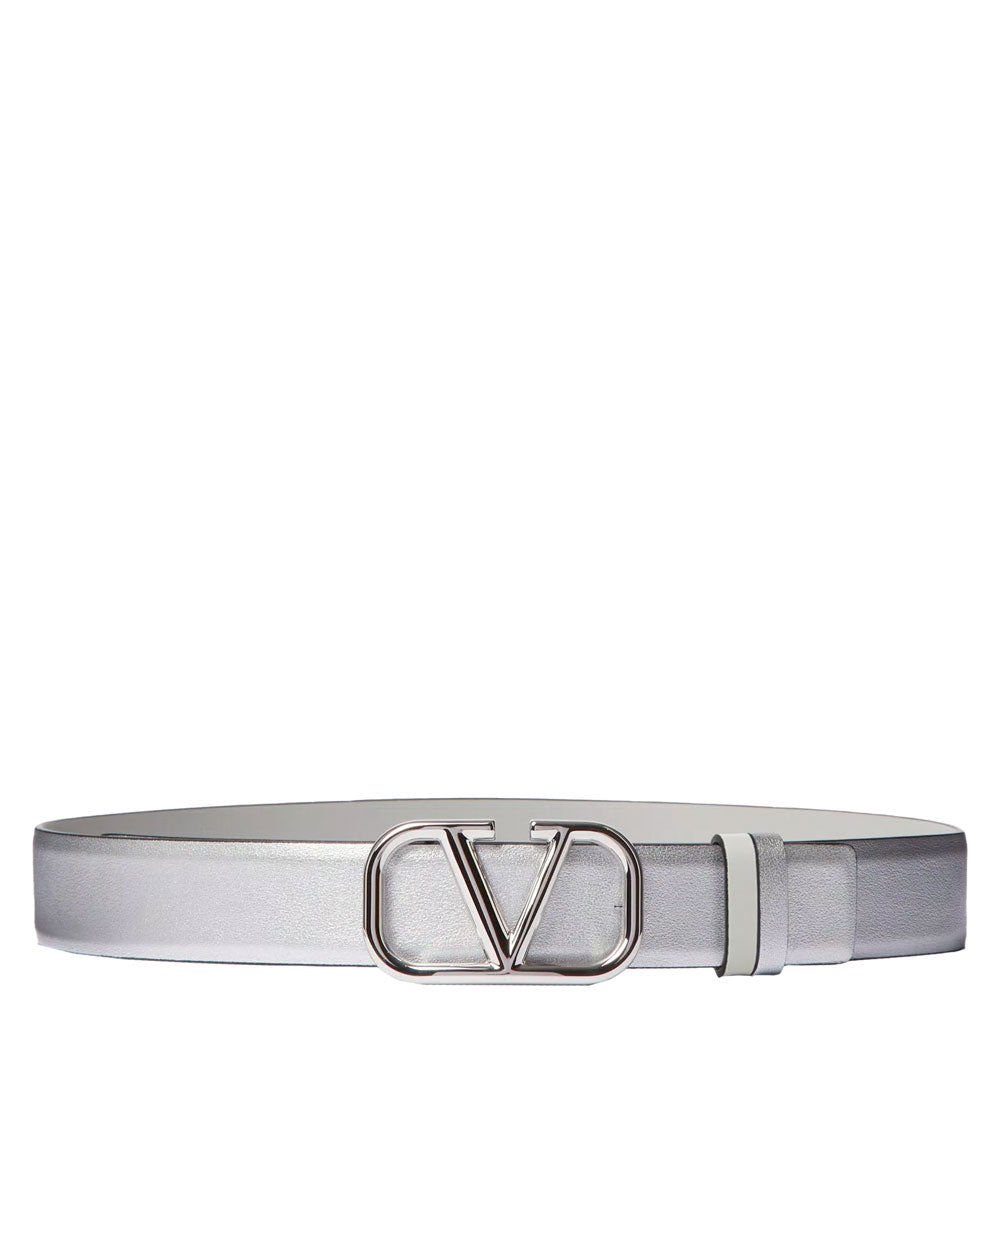 Vlogo Signature Reversible Belt in SIlver and Opal Grey